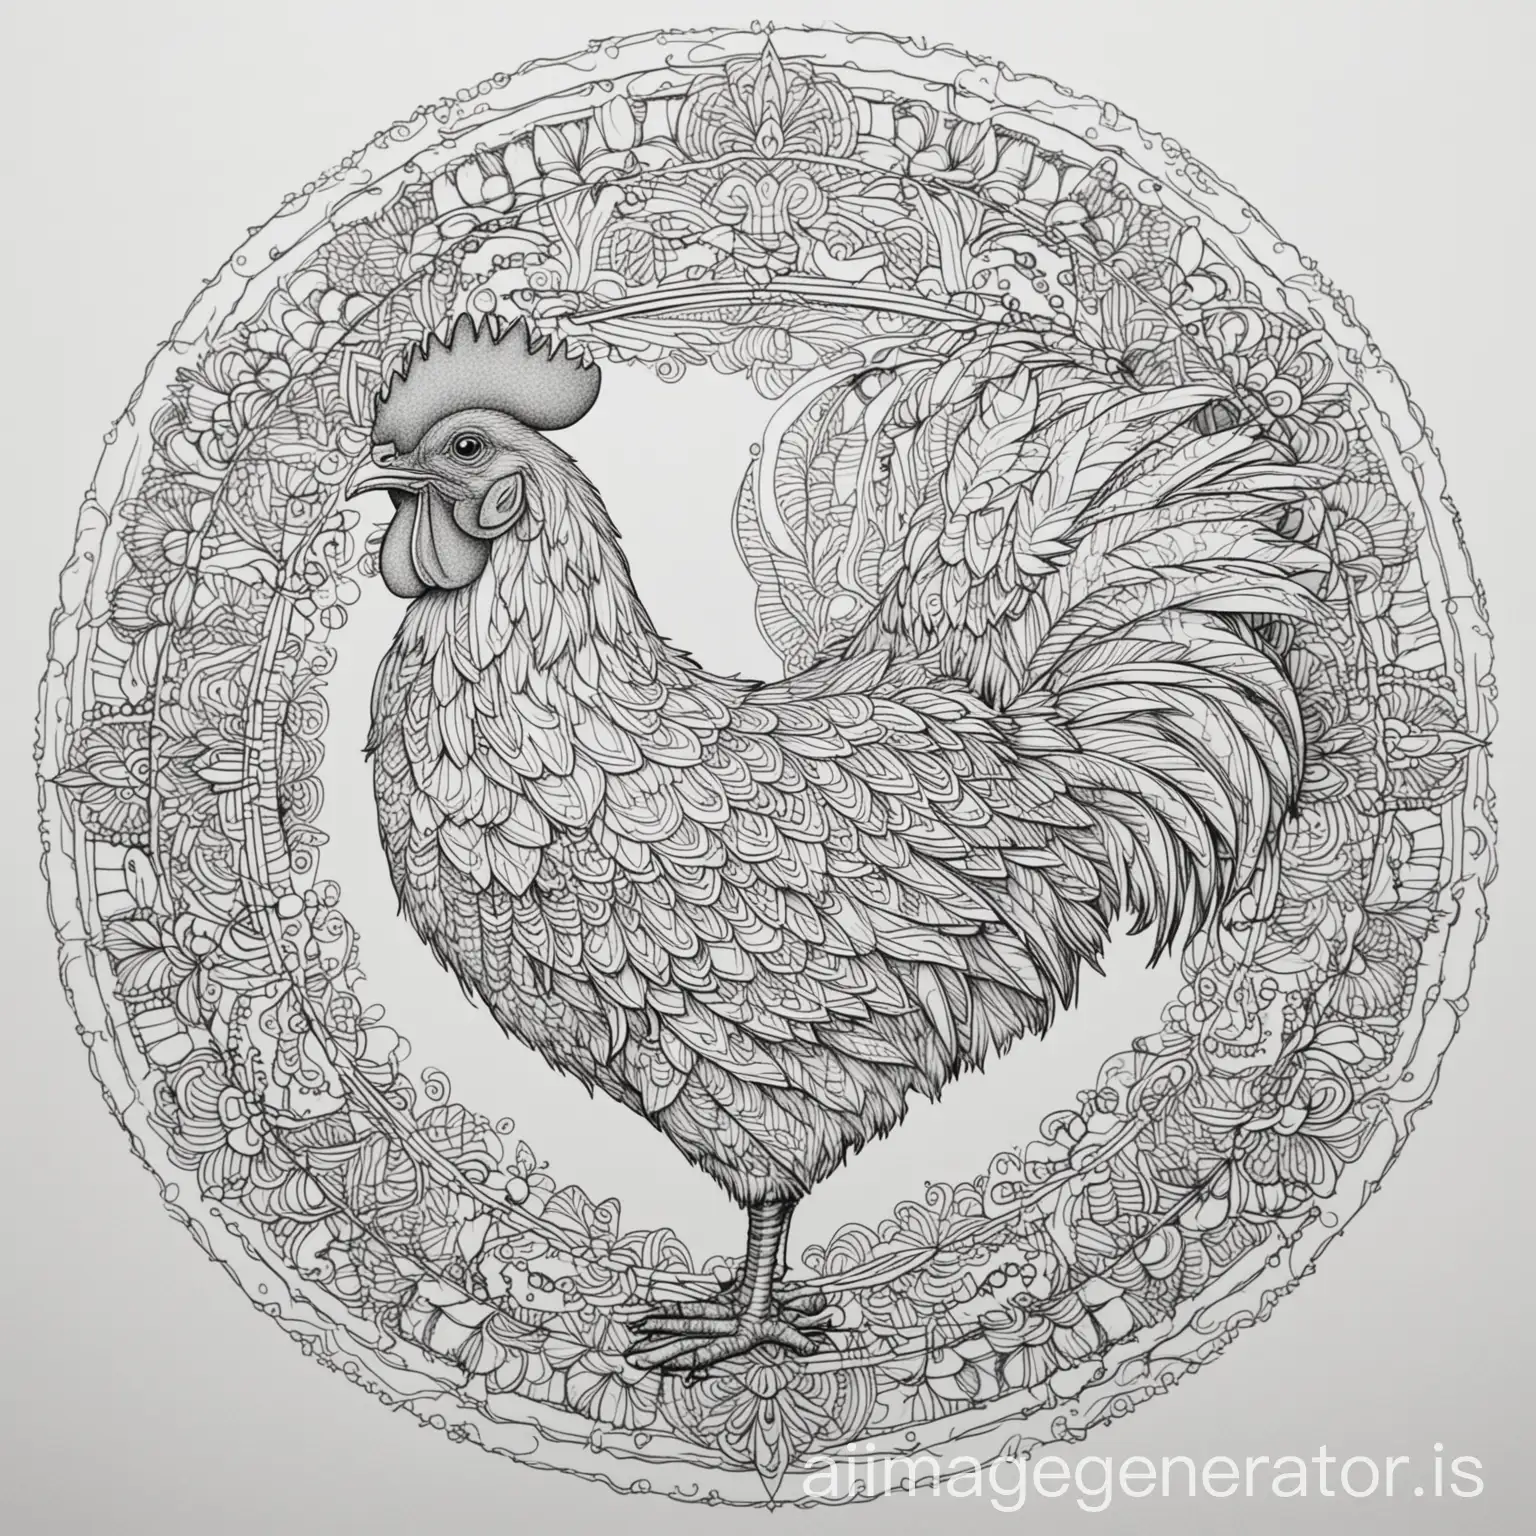 coloring page for adult, mandala, Chicken image, white background, fine line art, -ar 2:3